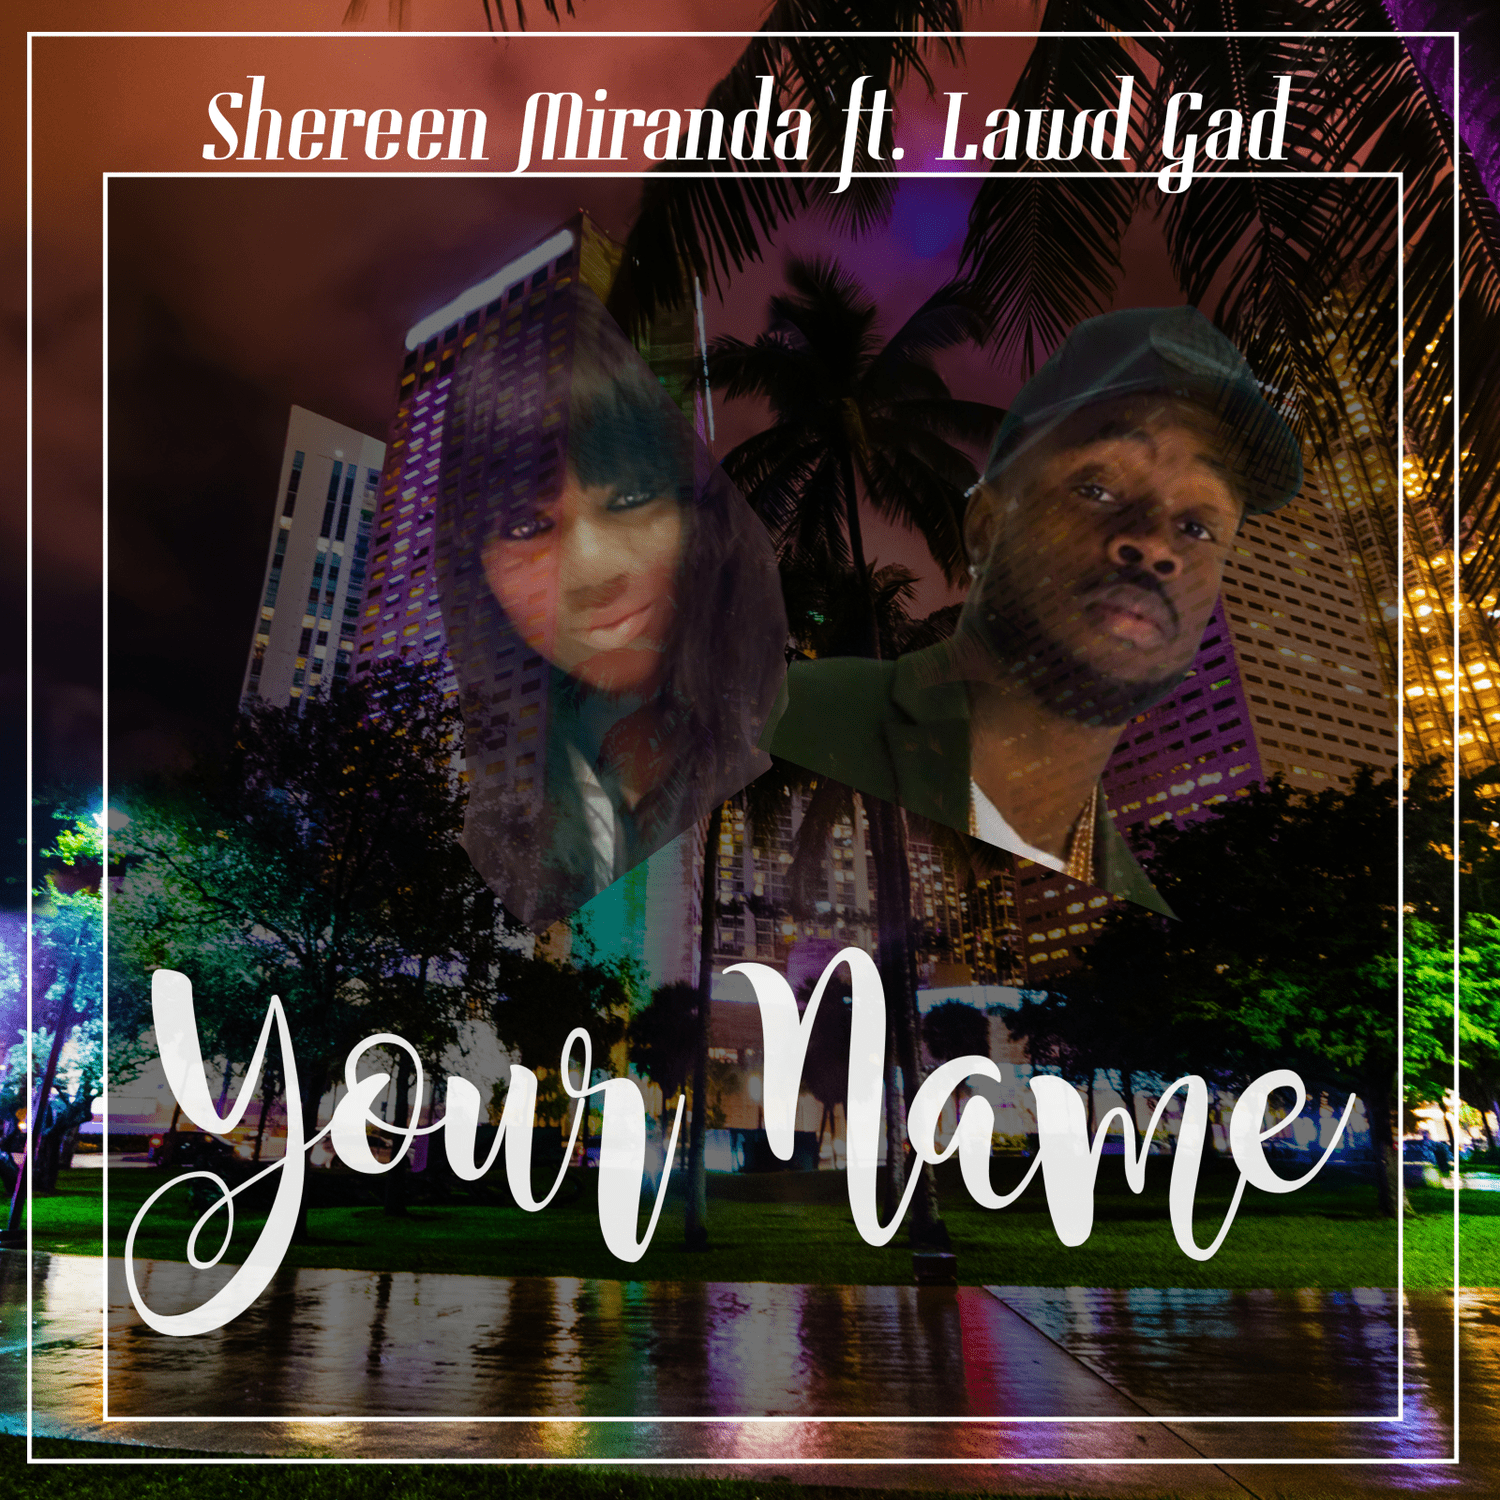 Art for Your Name by Shereen Miranda